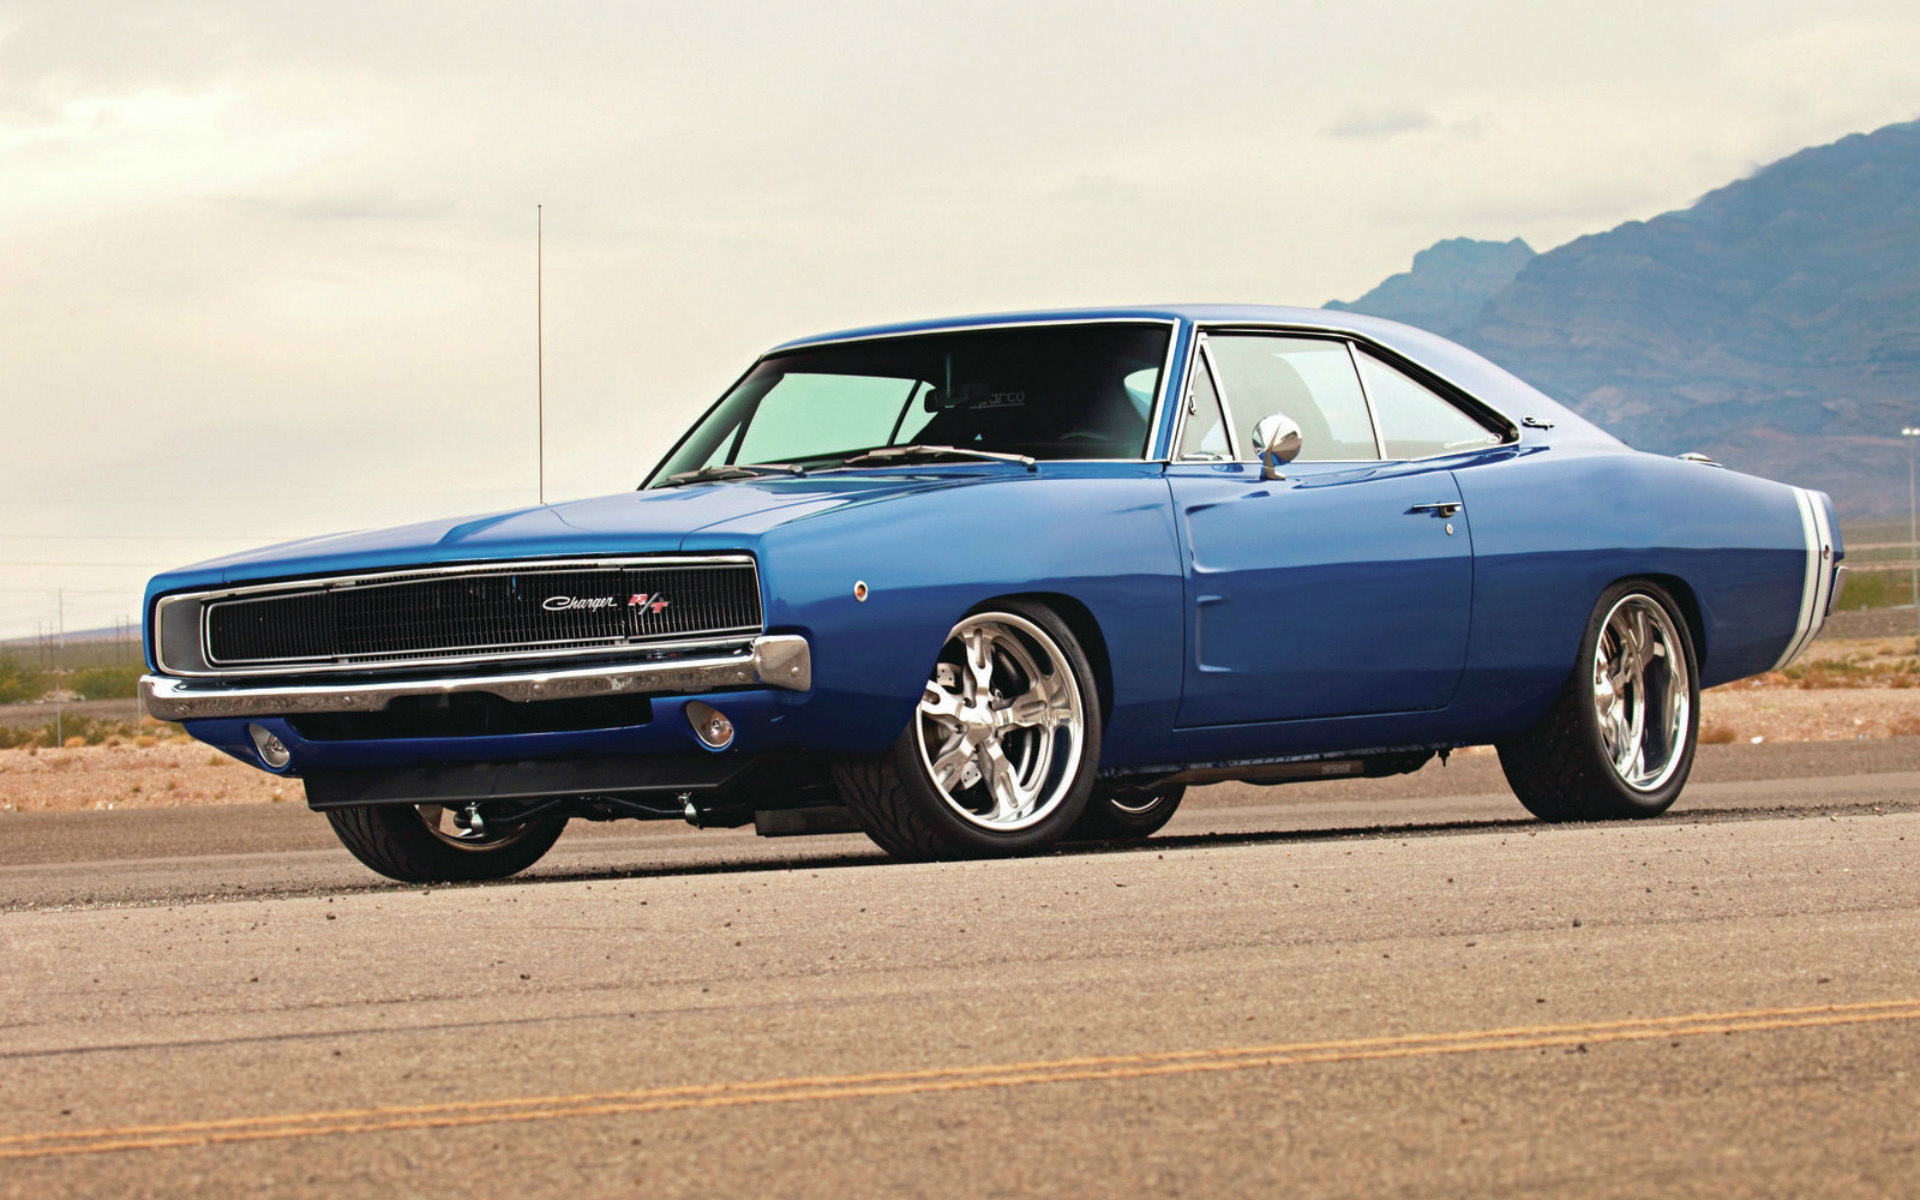 Dodge Charger RT Backgrounds, Compatible - PC, Mobile, Gadgets| 1920x1200 px